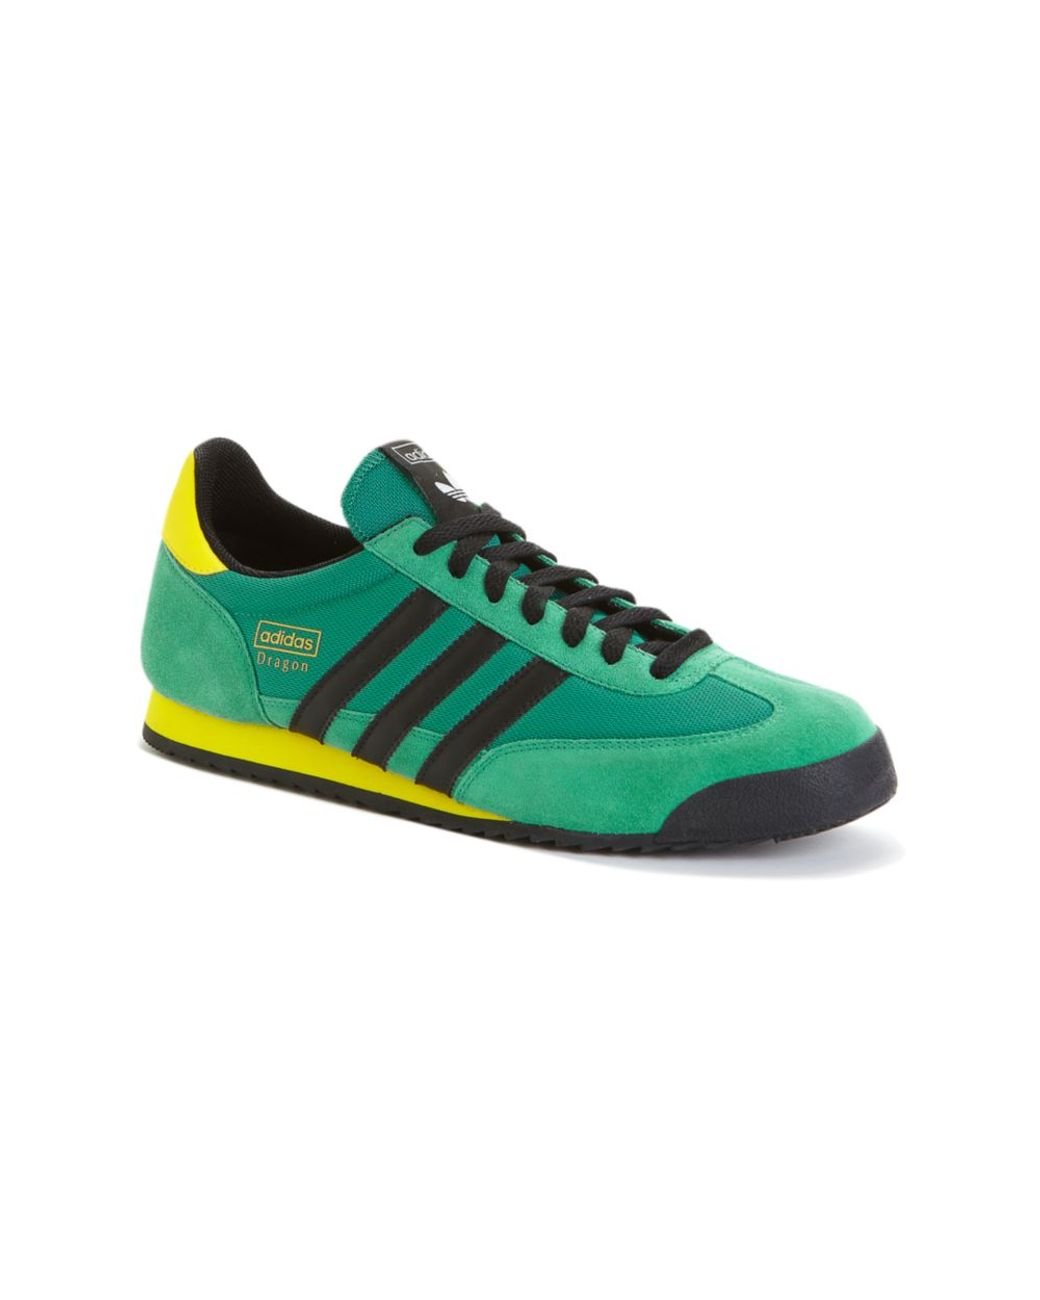 adidas Dragon Sneakers in Green/Black/Yellow (Green) for Men | Lyst